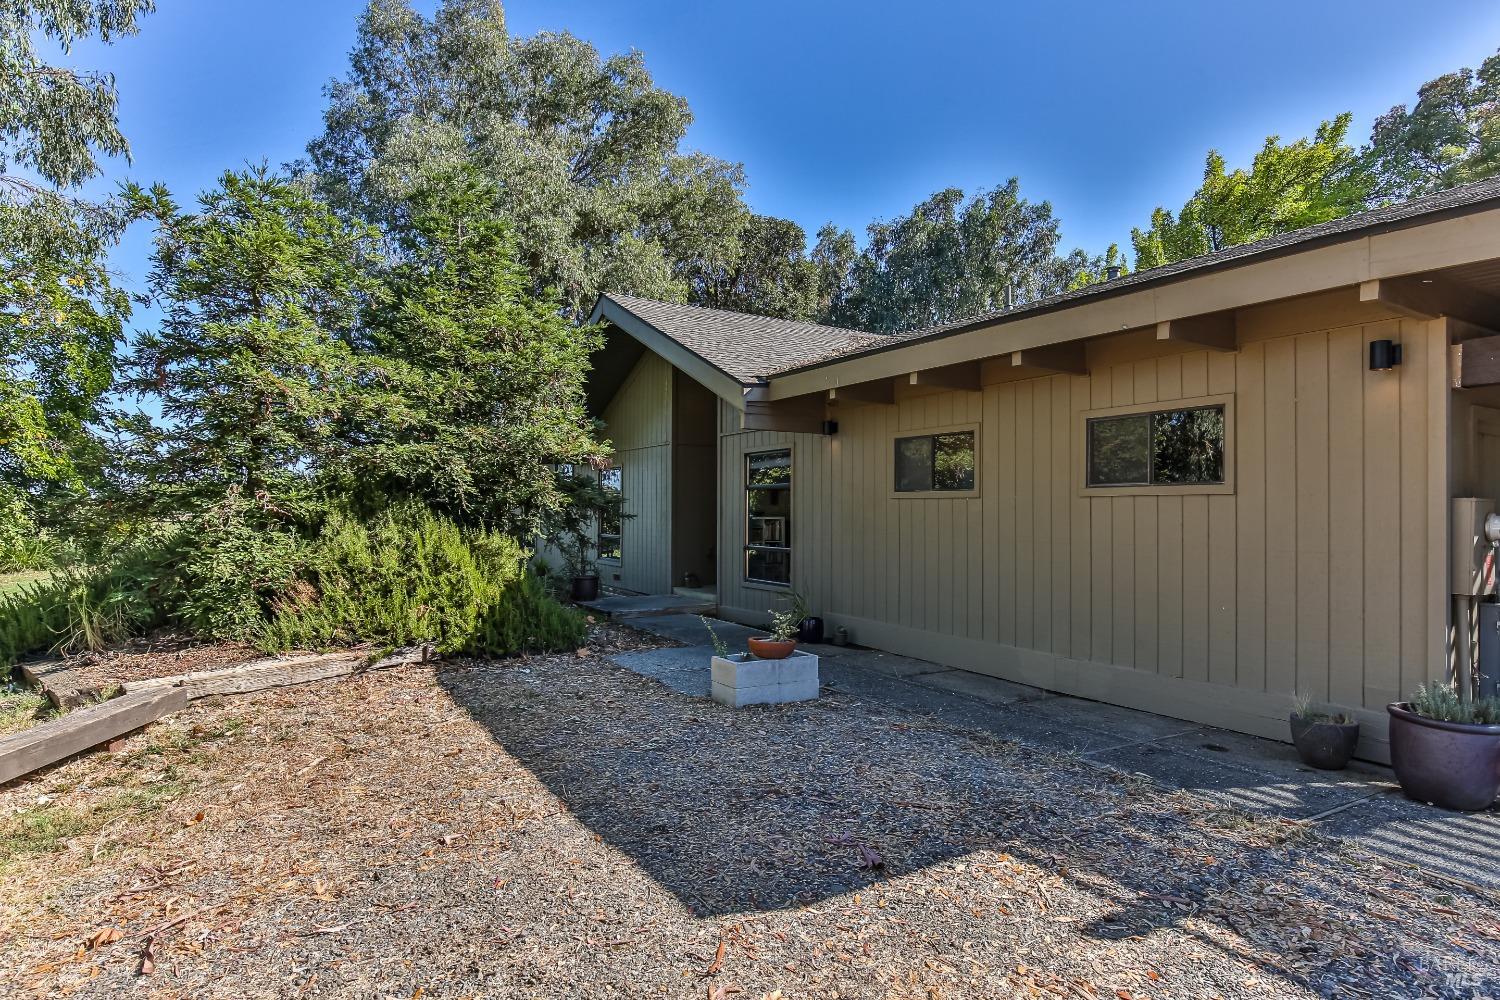 Photo of 5794 Silveyville Rd in Dixon, CA